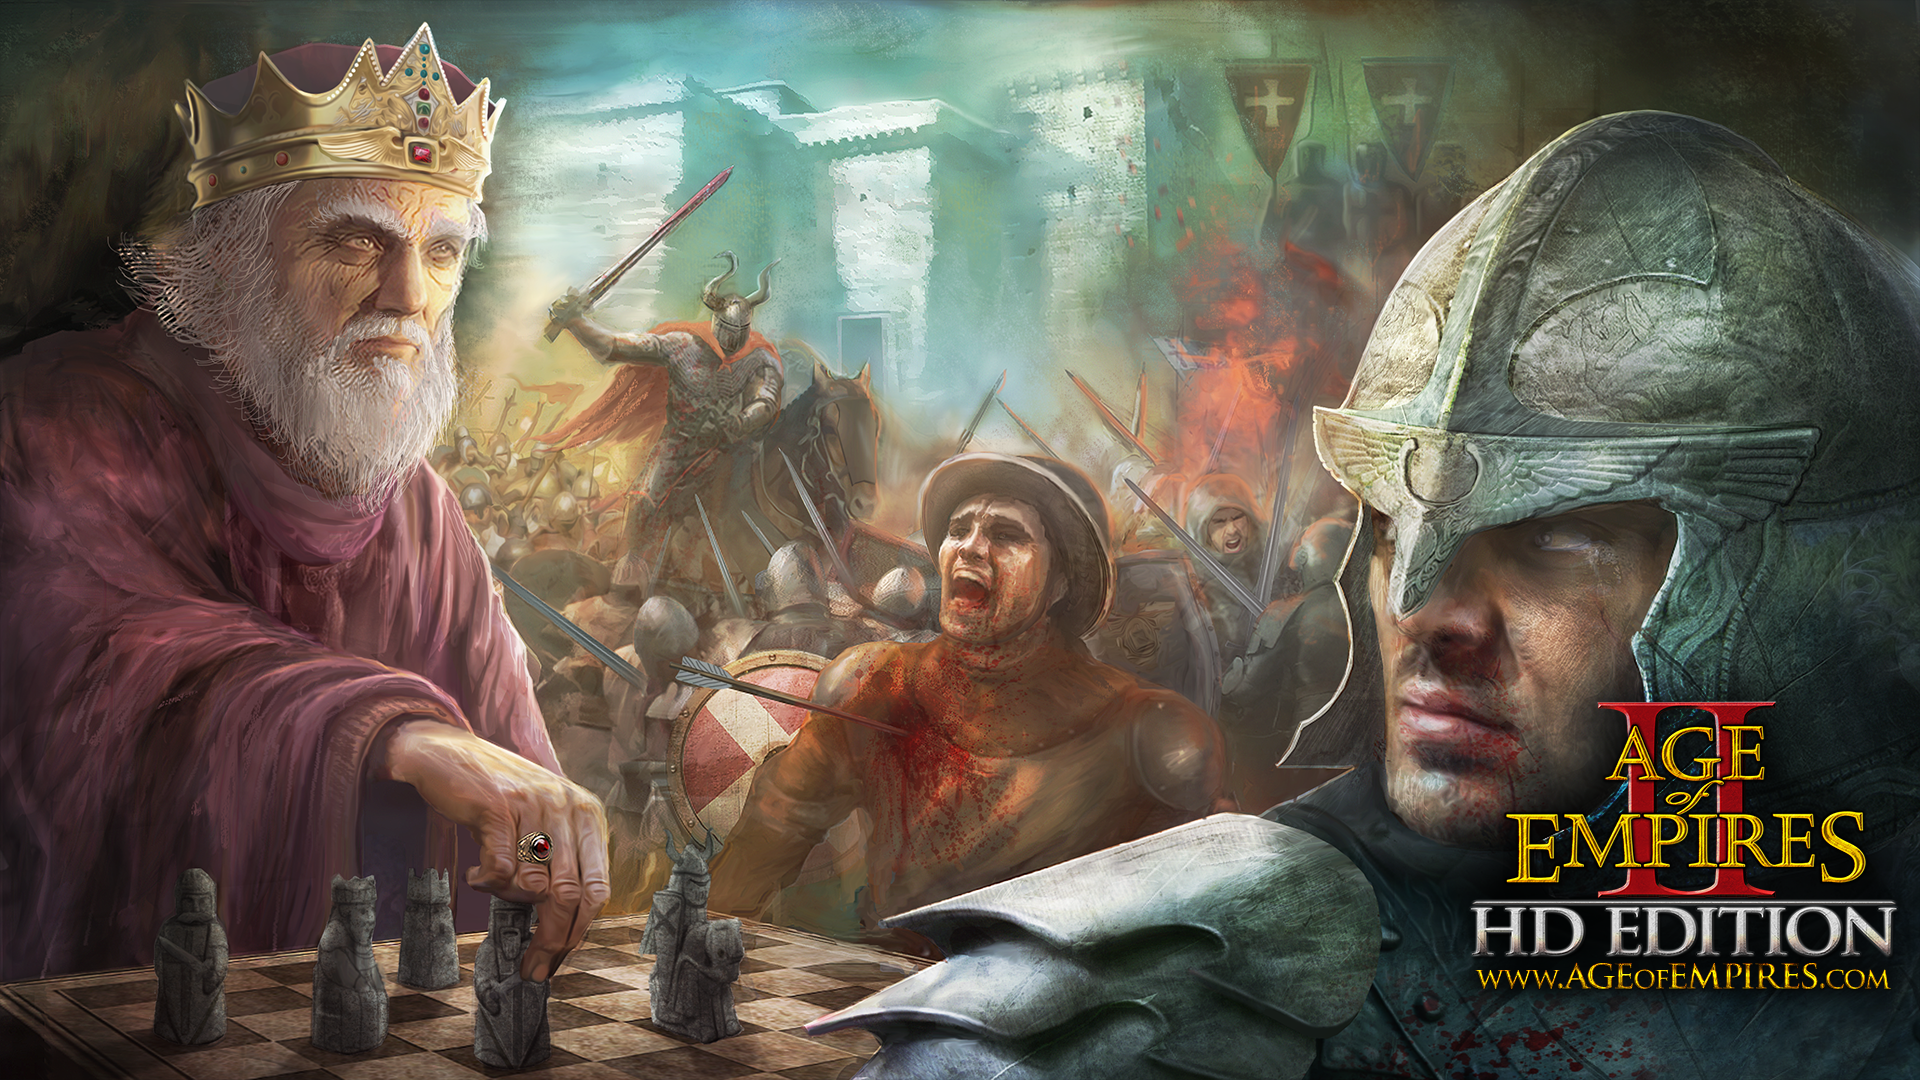 age of empires 2 hd download size